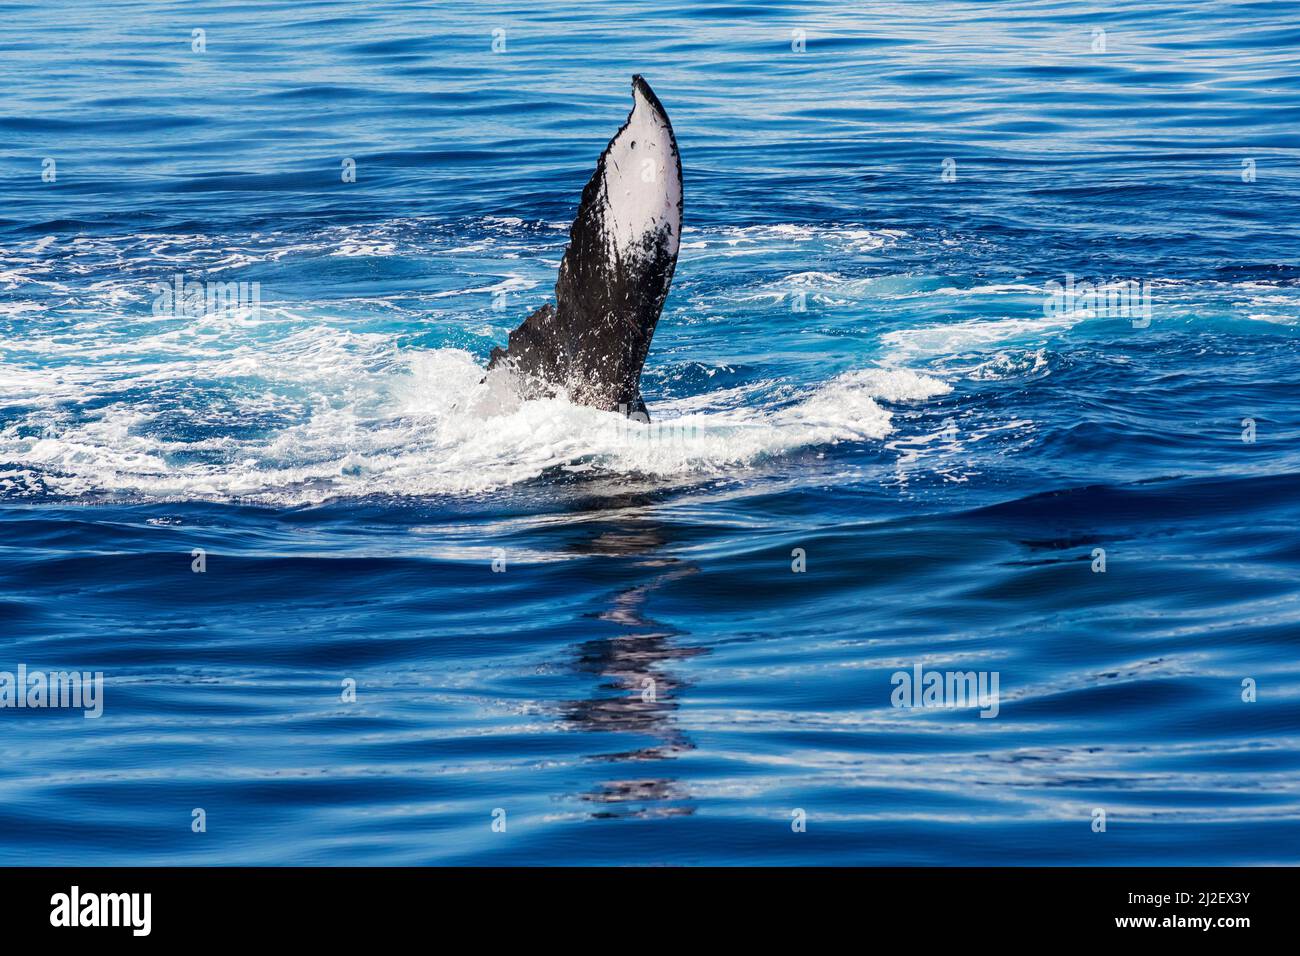 pectoral fin of humpback whale or megaptera novaeangliae above water in pacific ocean Stock Photo